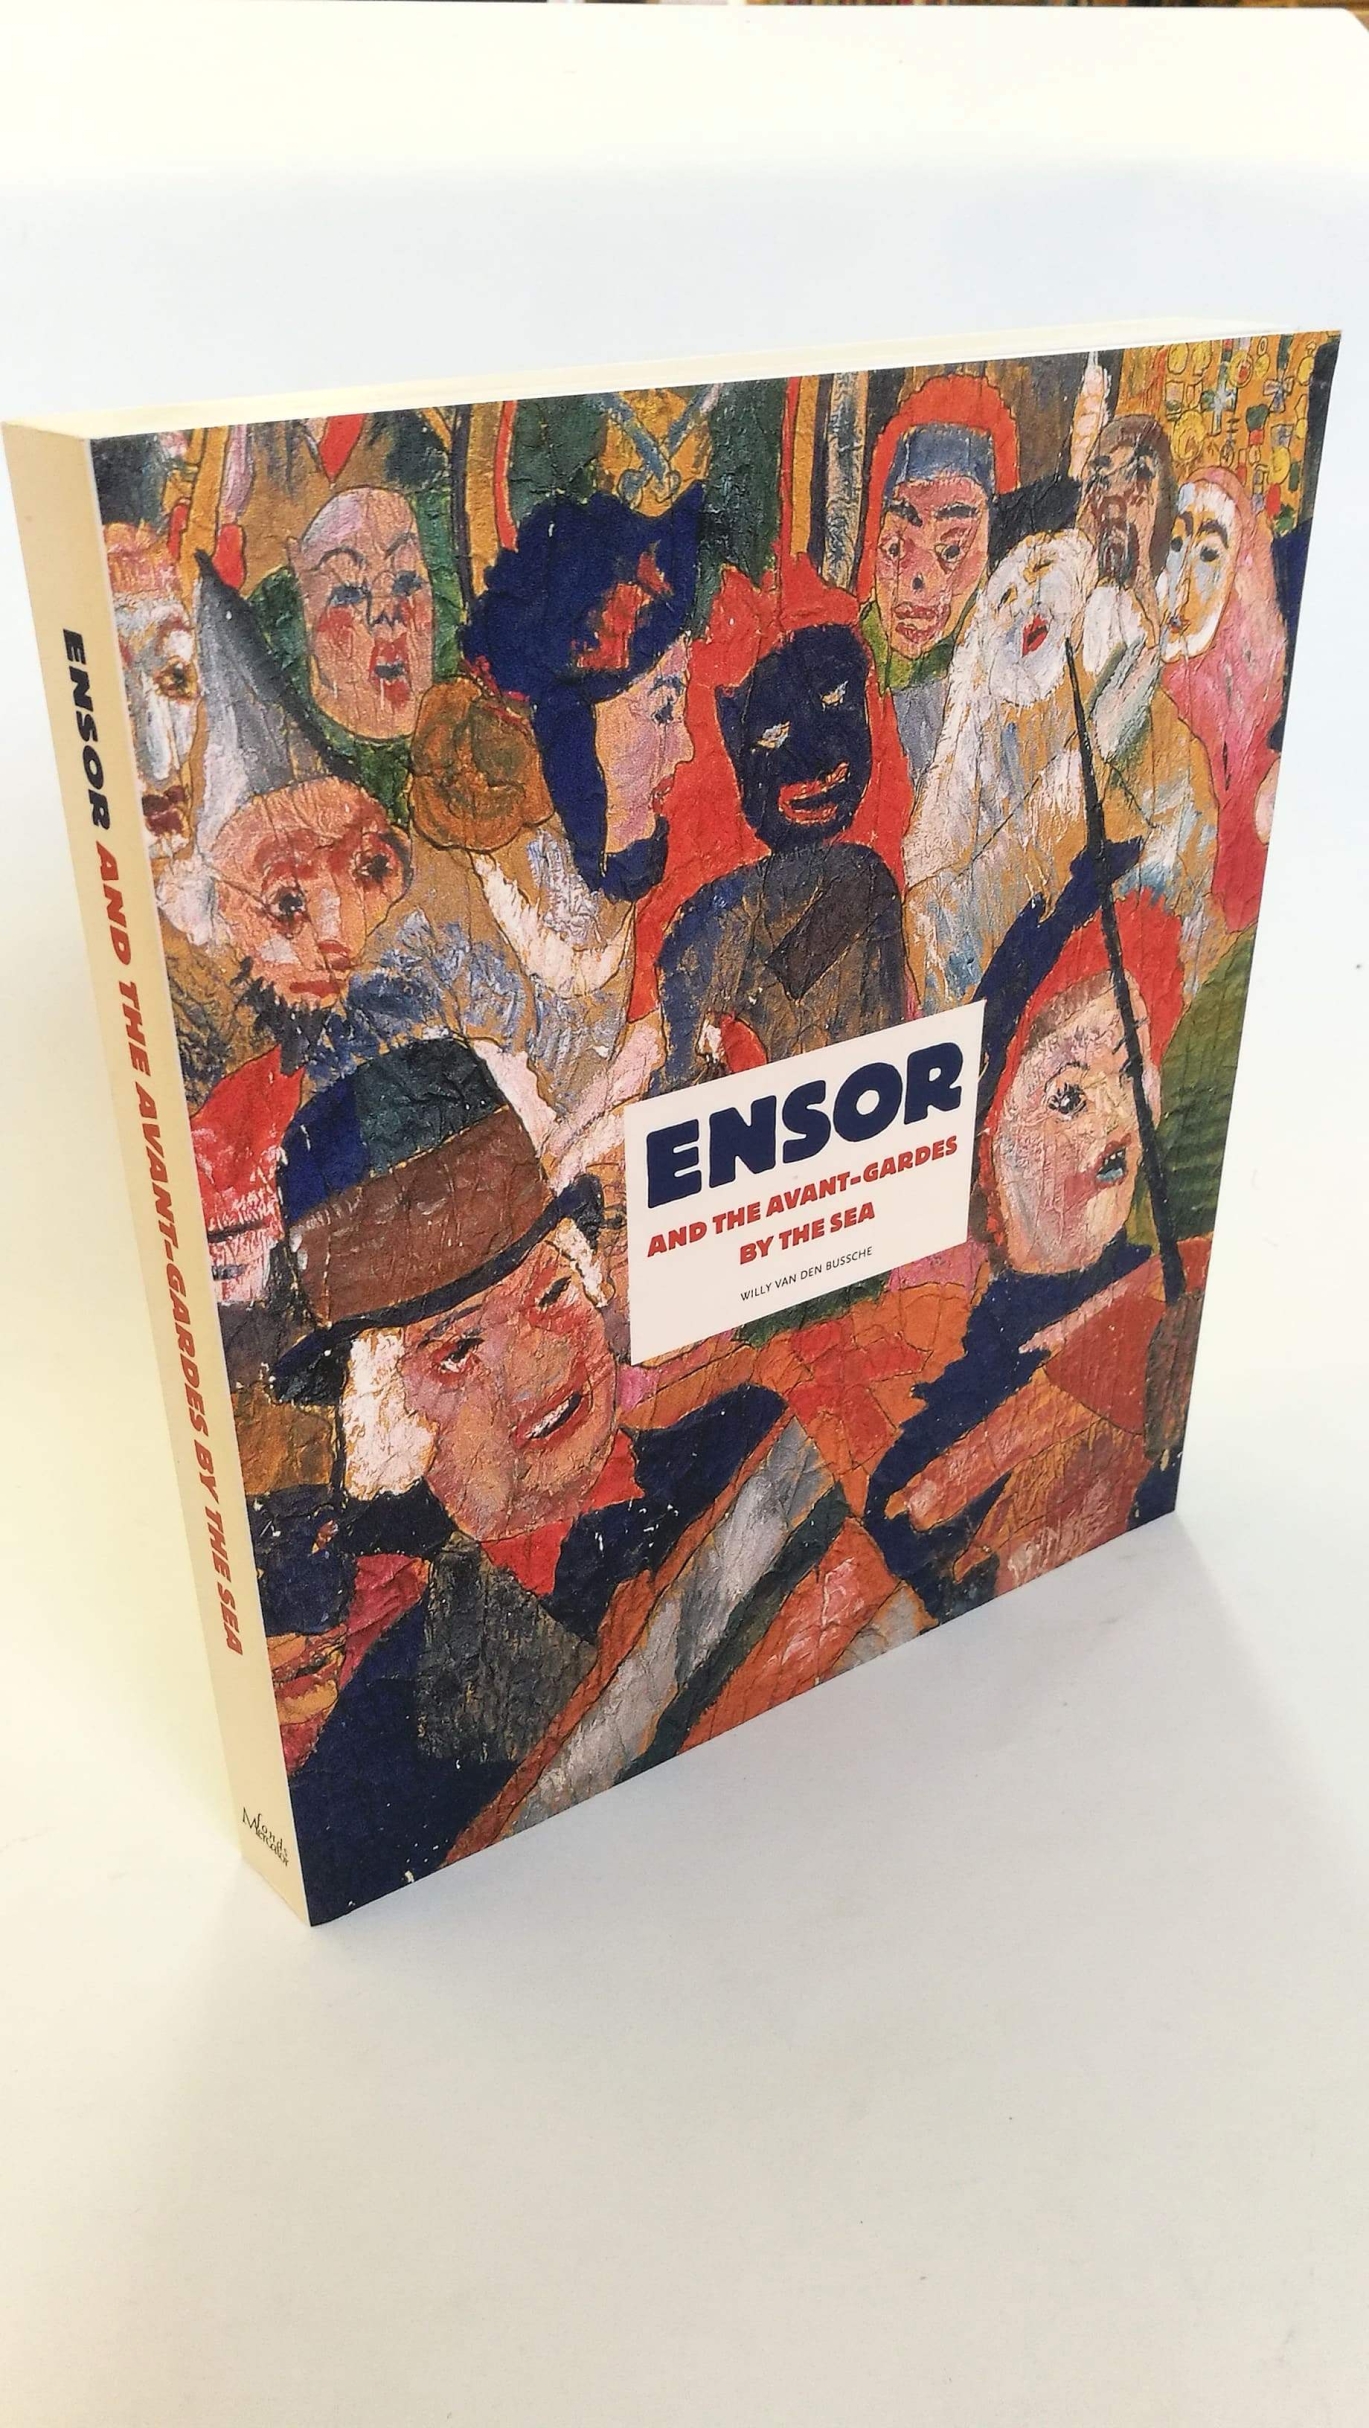 Willy van den Bussche: Ensor And the Avant-Gardes by the sea